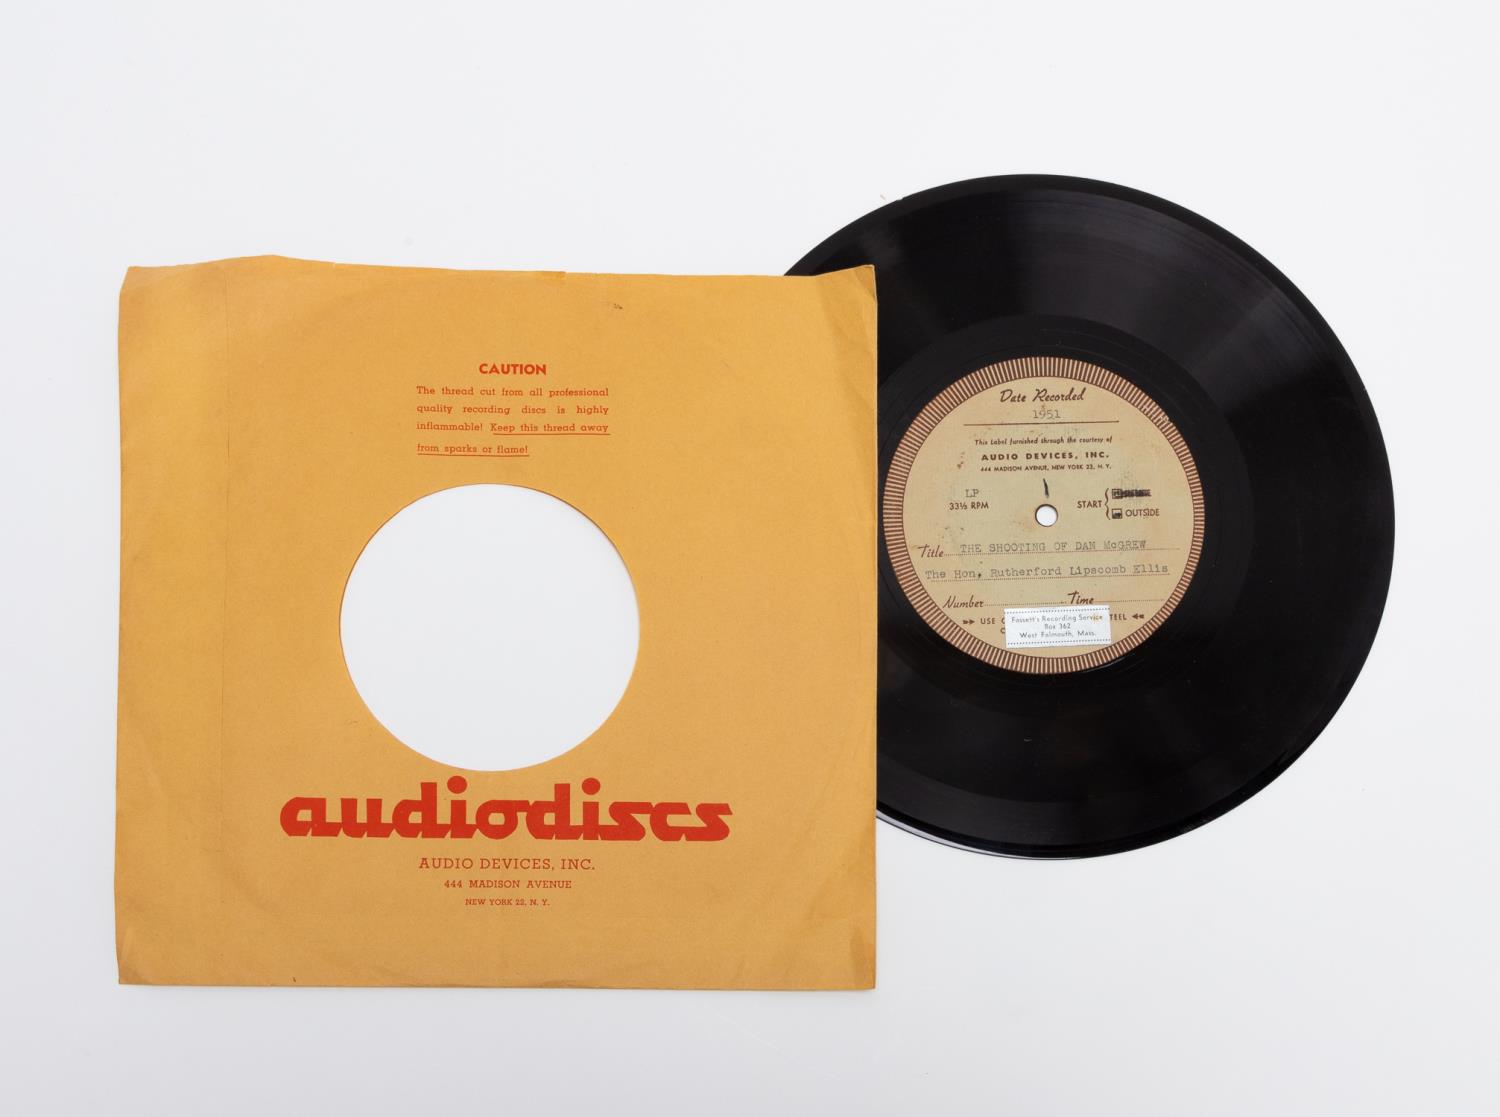 CUSTOM 1951 RECORD BY RUTHERFORD 359c69